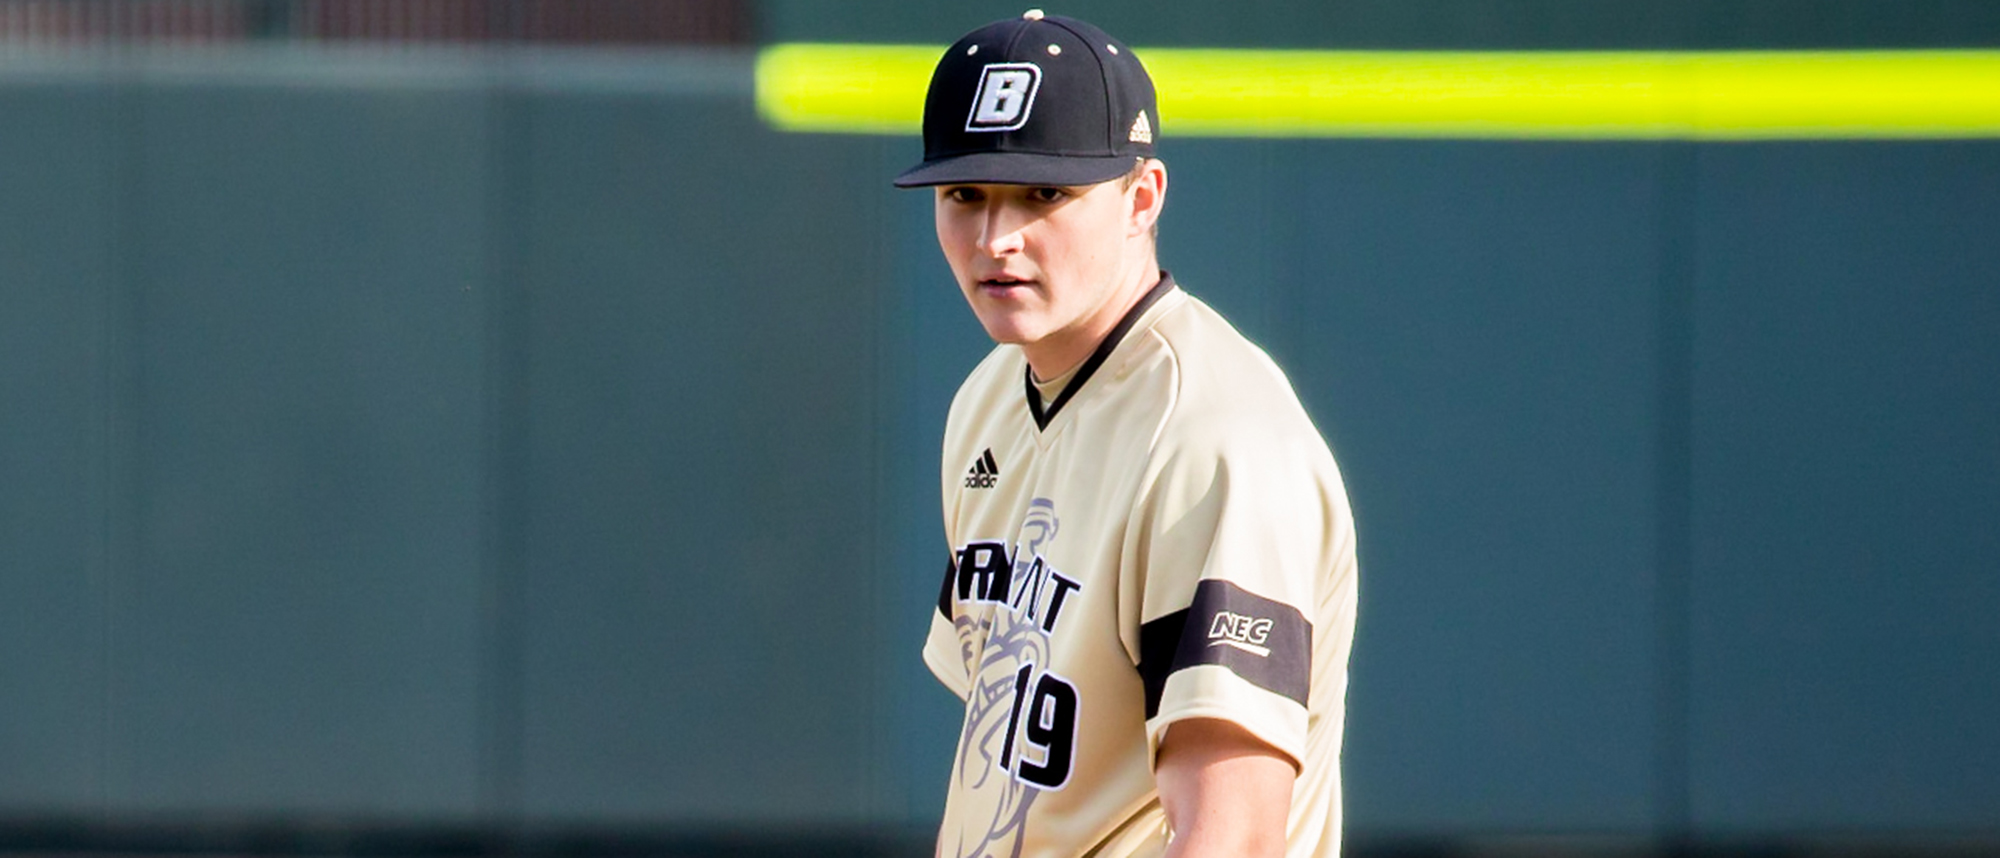 Baseball Season Preview: Bryant pitchers primed for big 2019